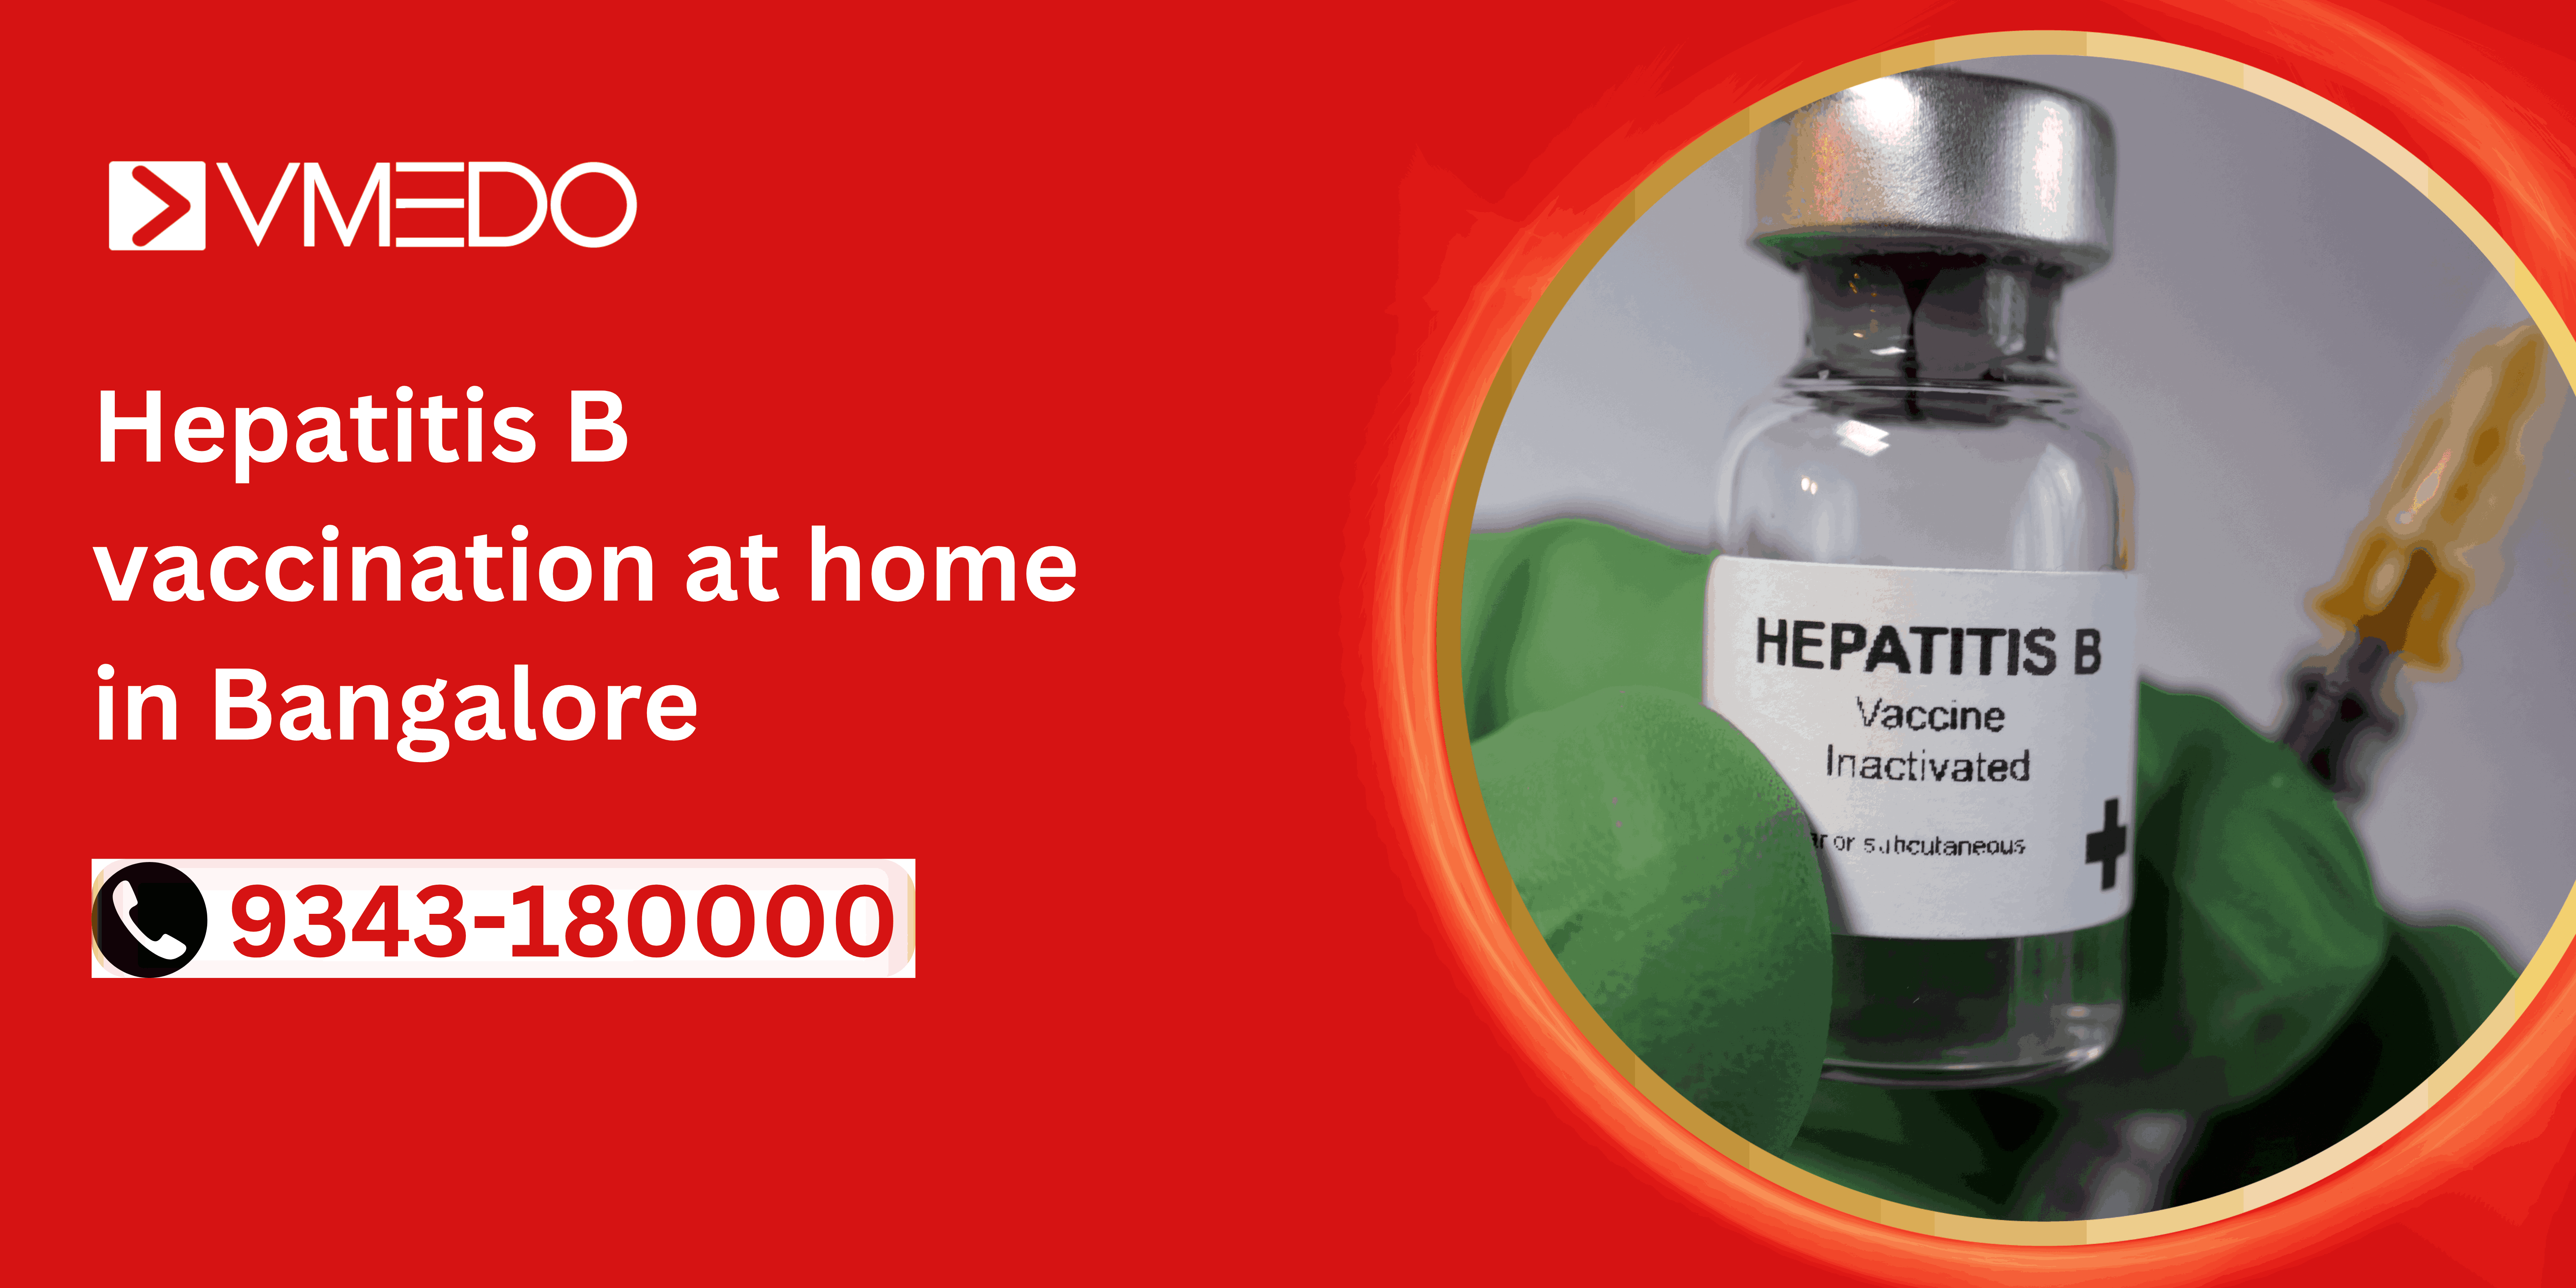 Hepatitis B vaccination at home in Bangalore